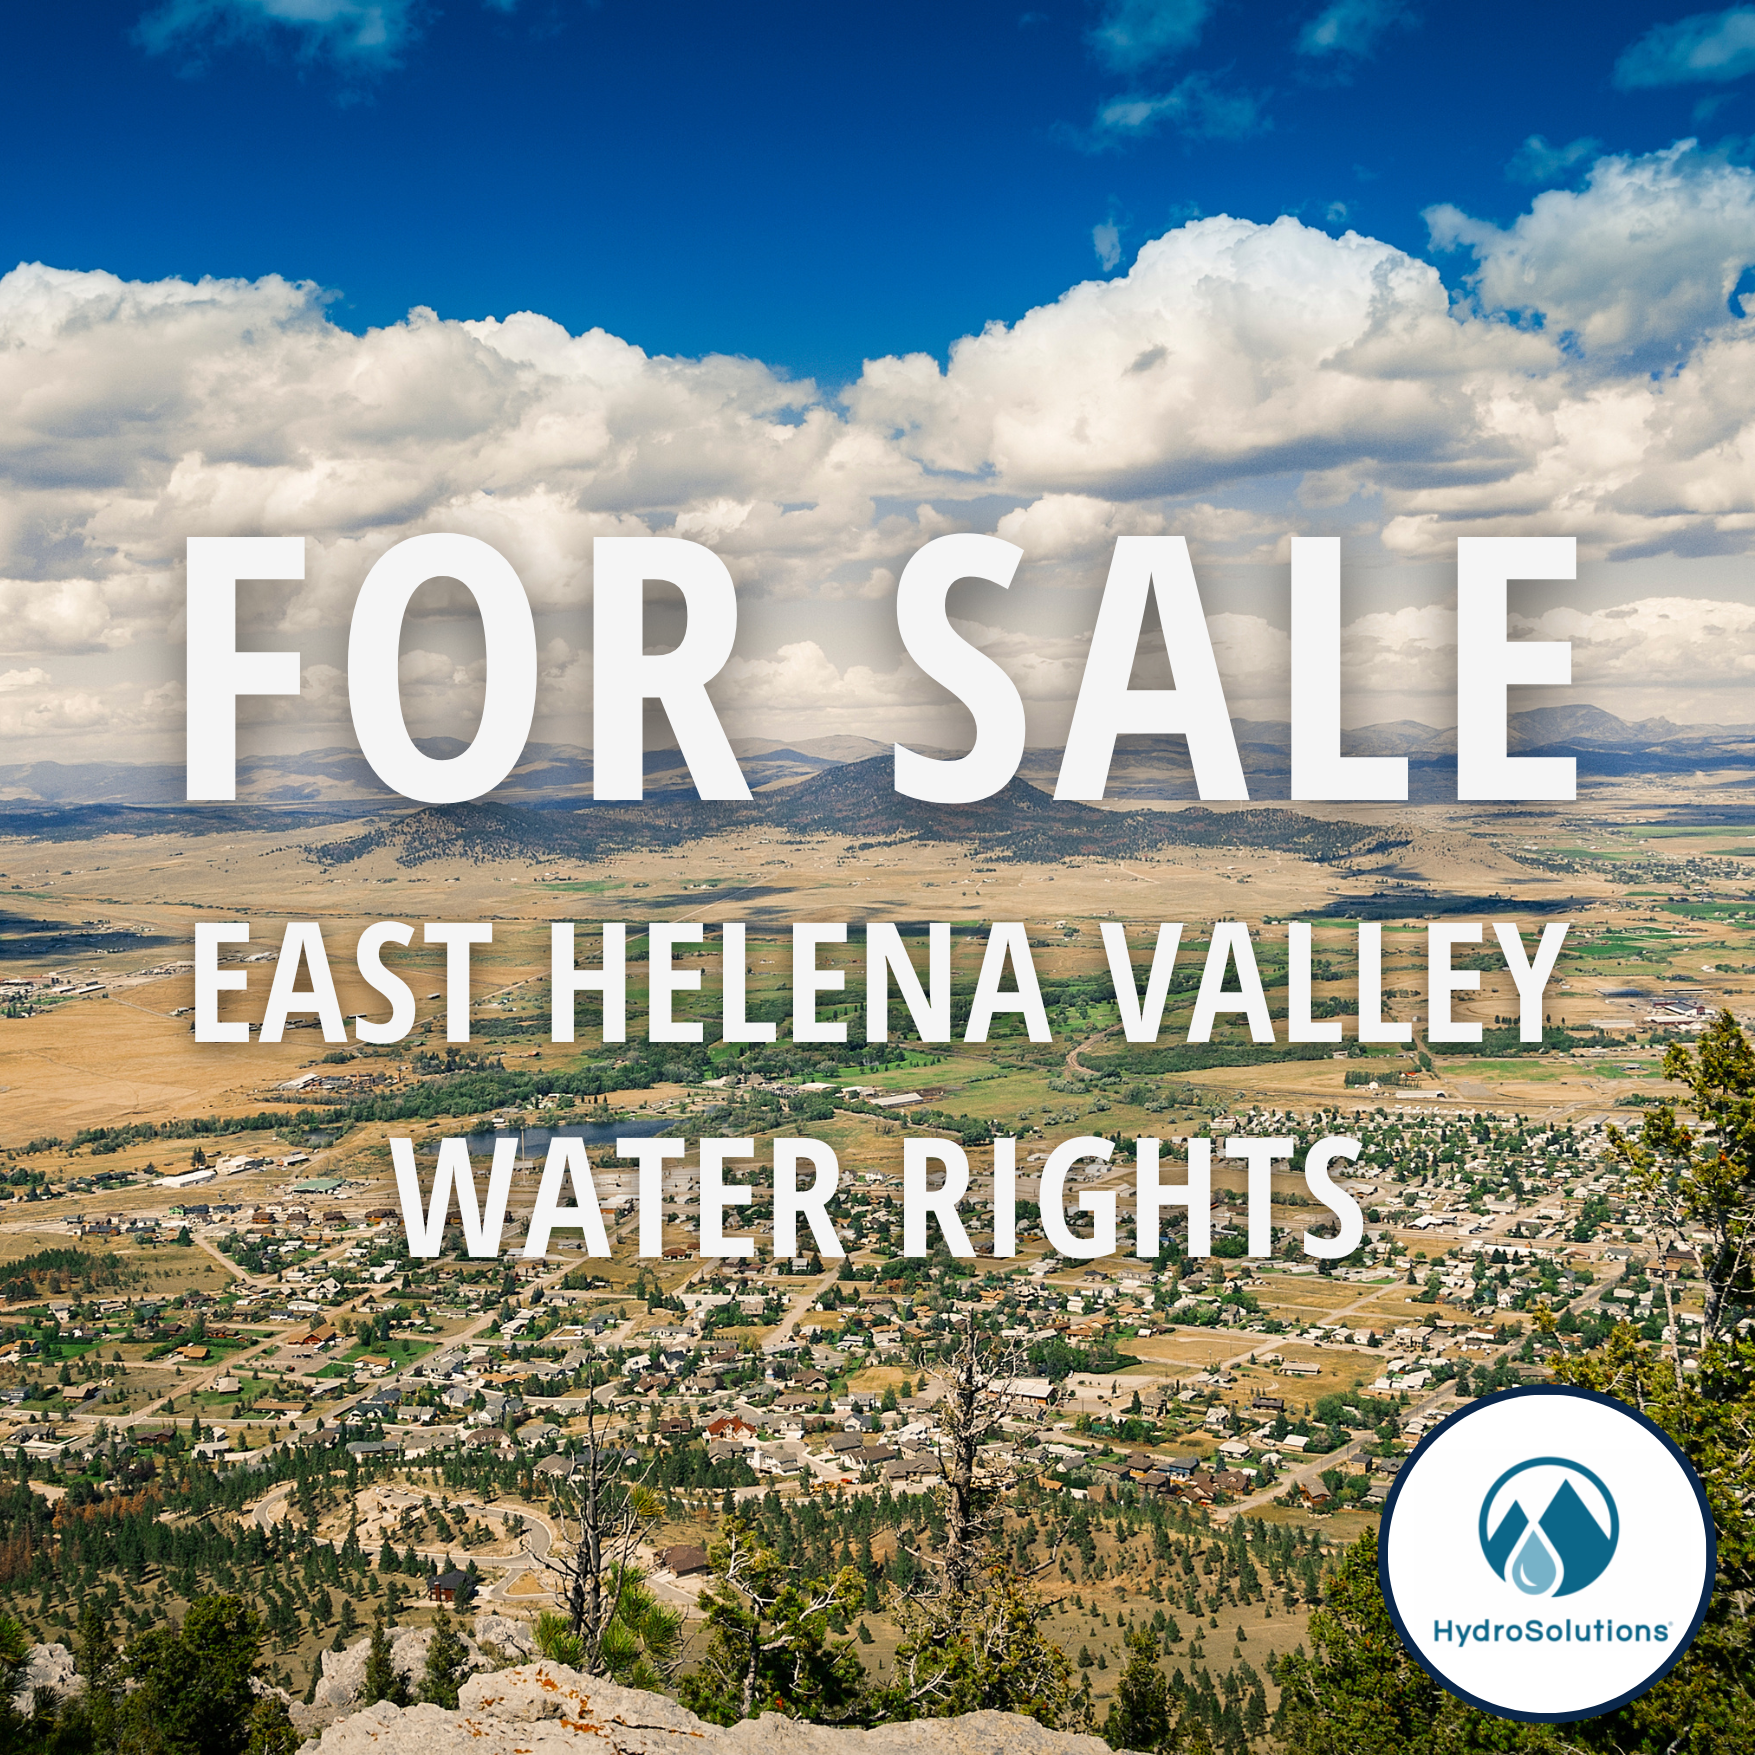 East Helena Valley Water Rights For Sale - HydroSolutions